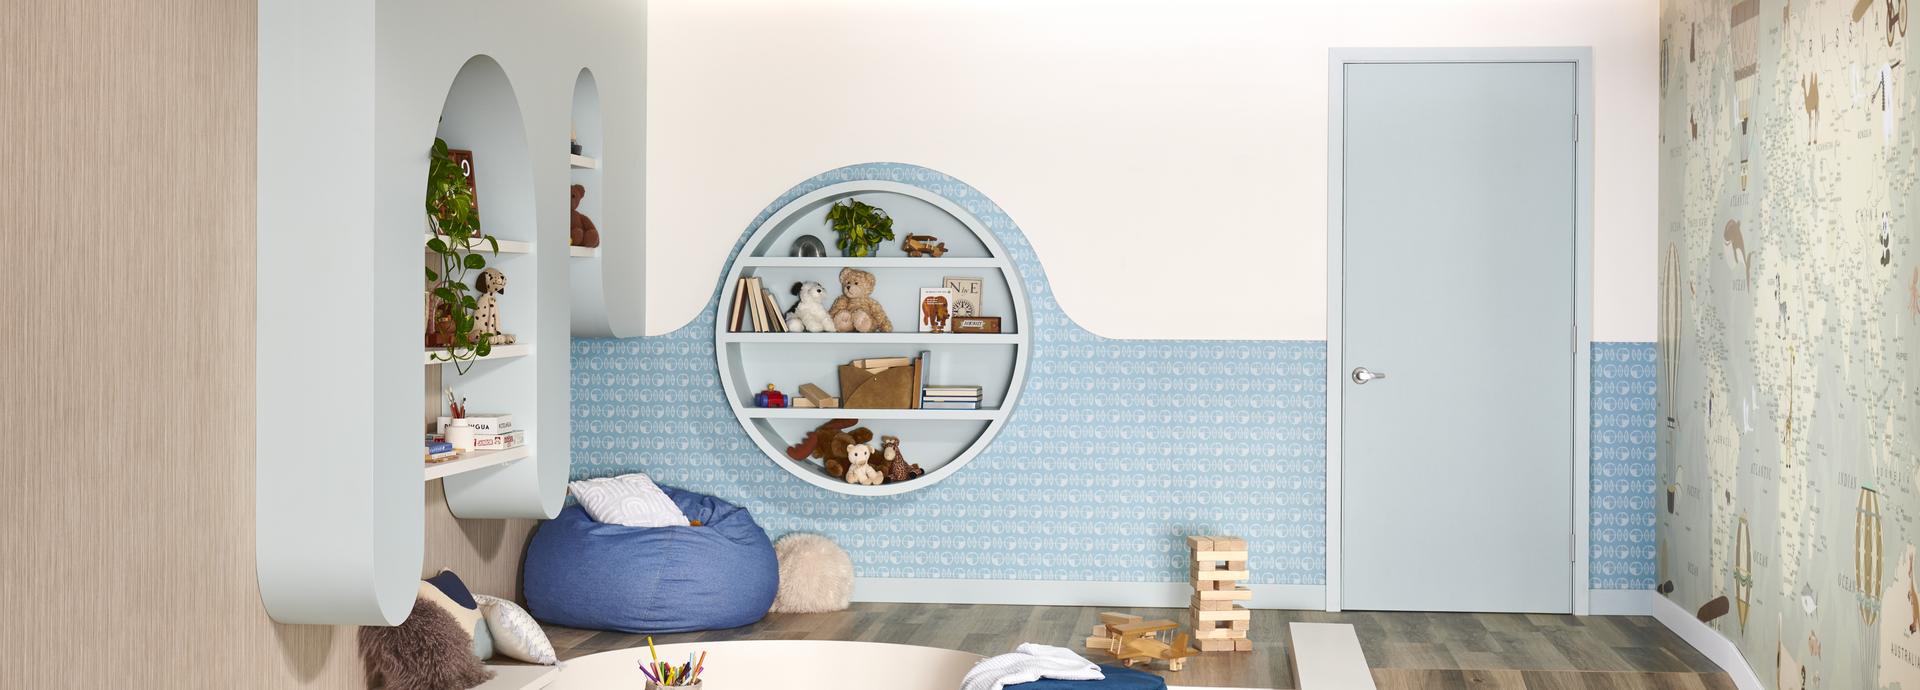 Acrovyn Wall Covering Children Playroom Set